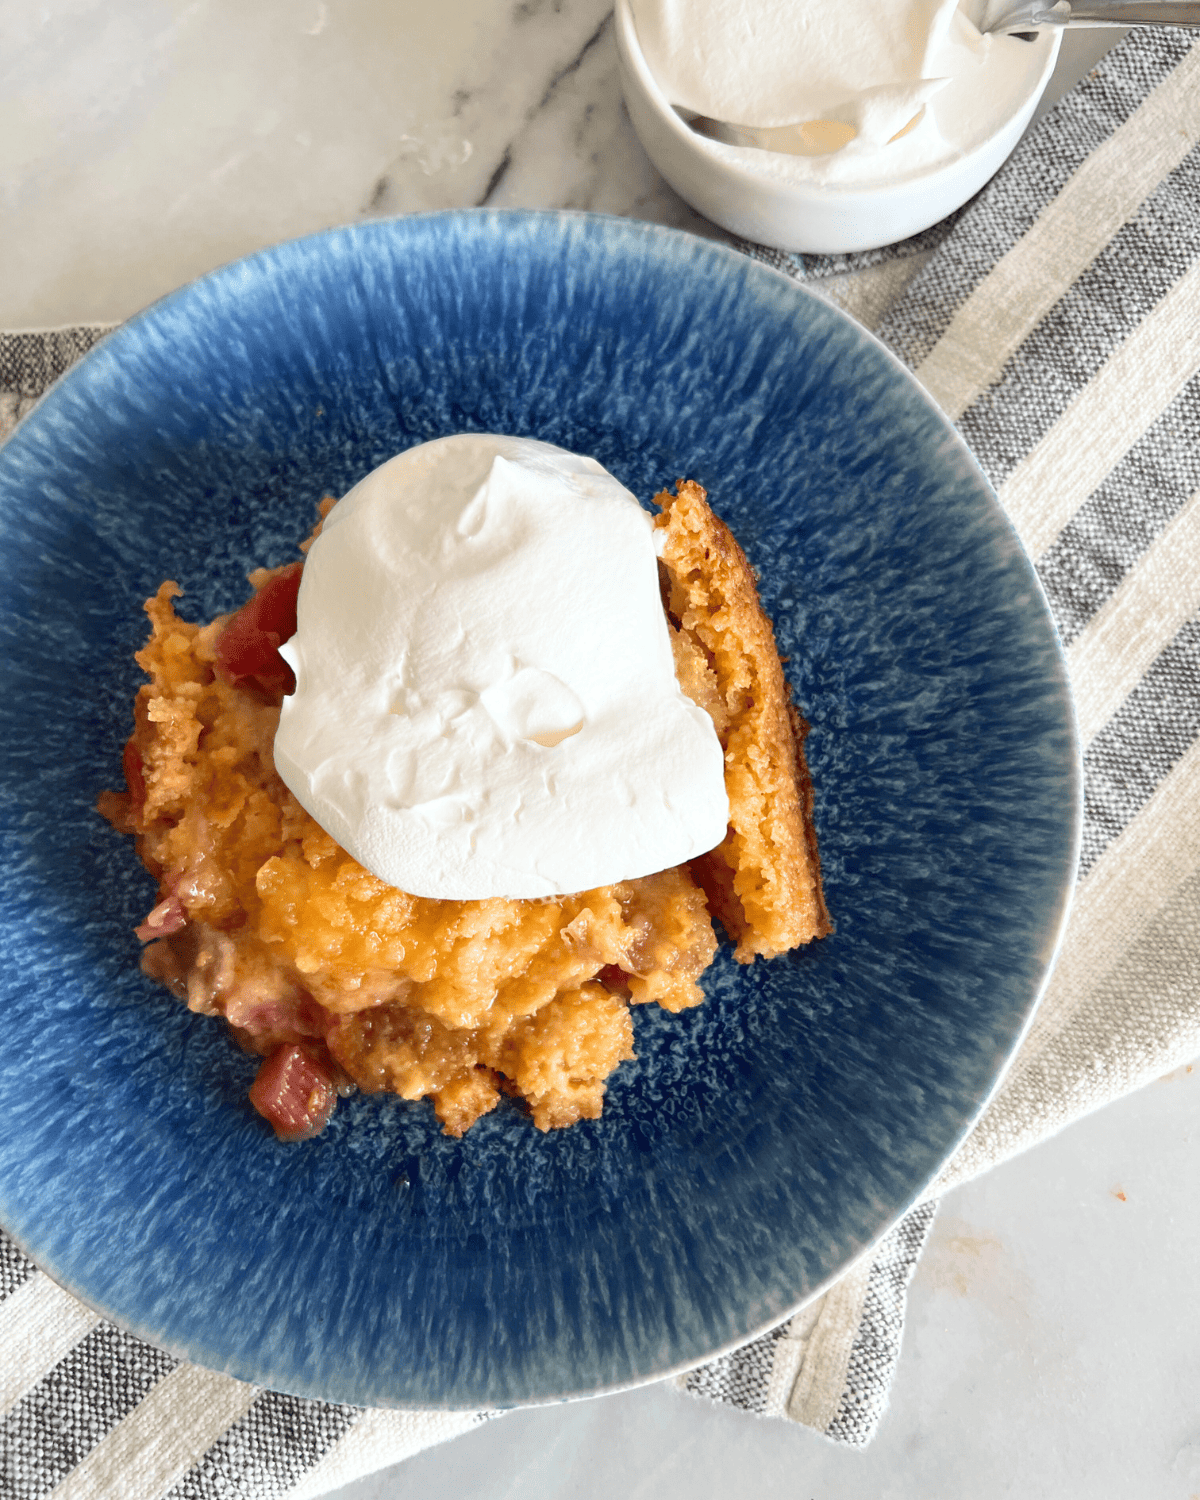 Finished rhubarb dump cake on a blue plate with a dollop of whipped topping. 